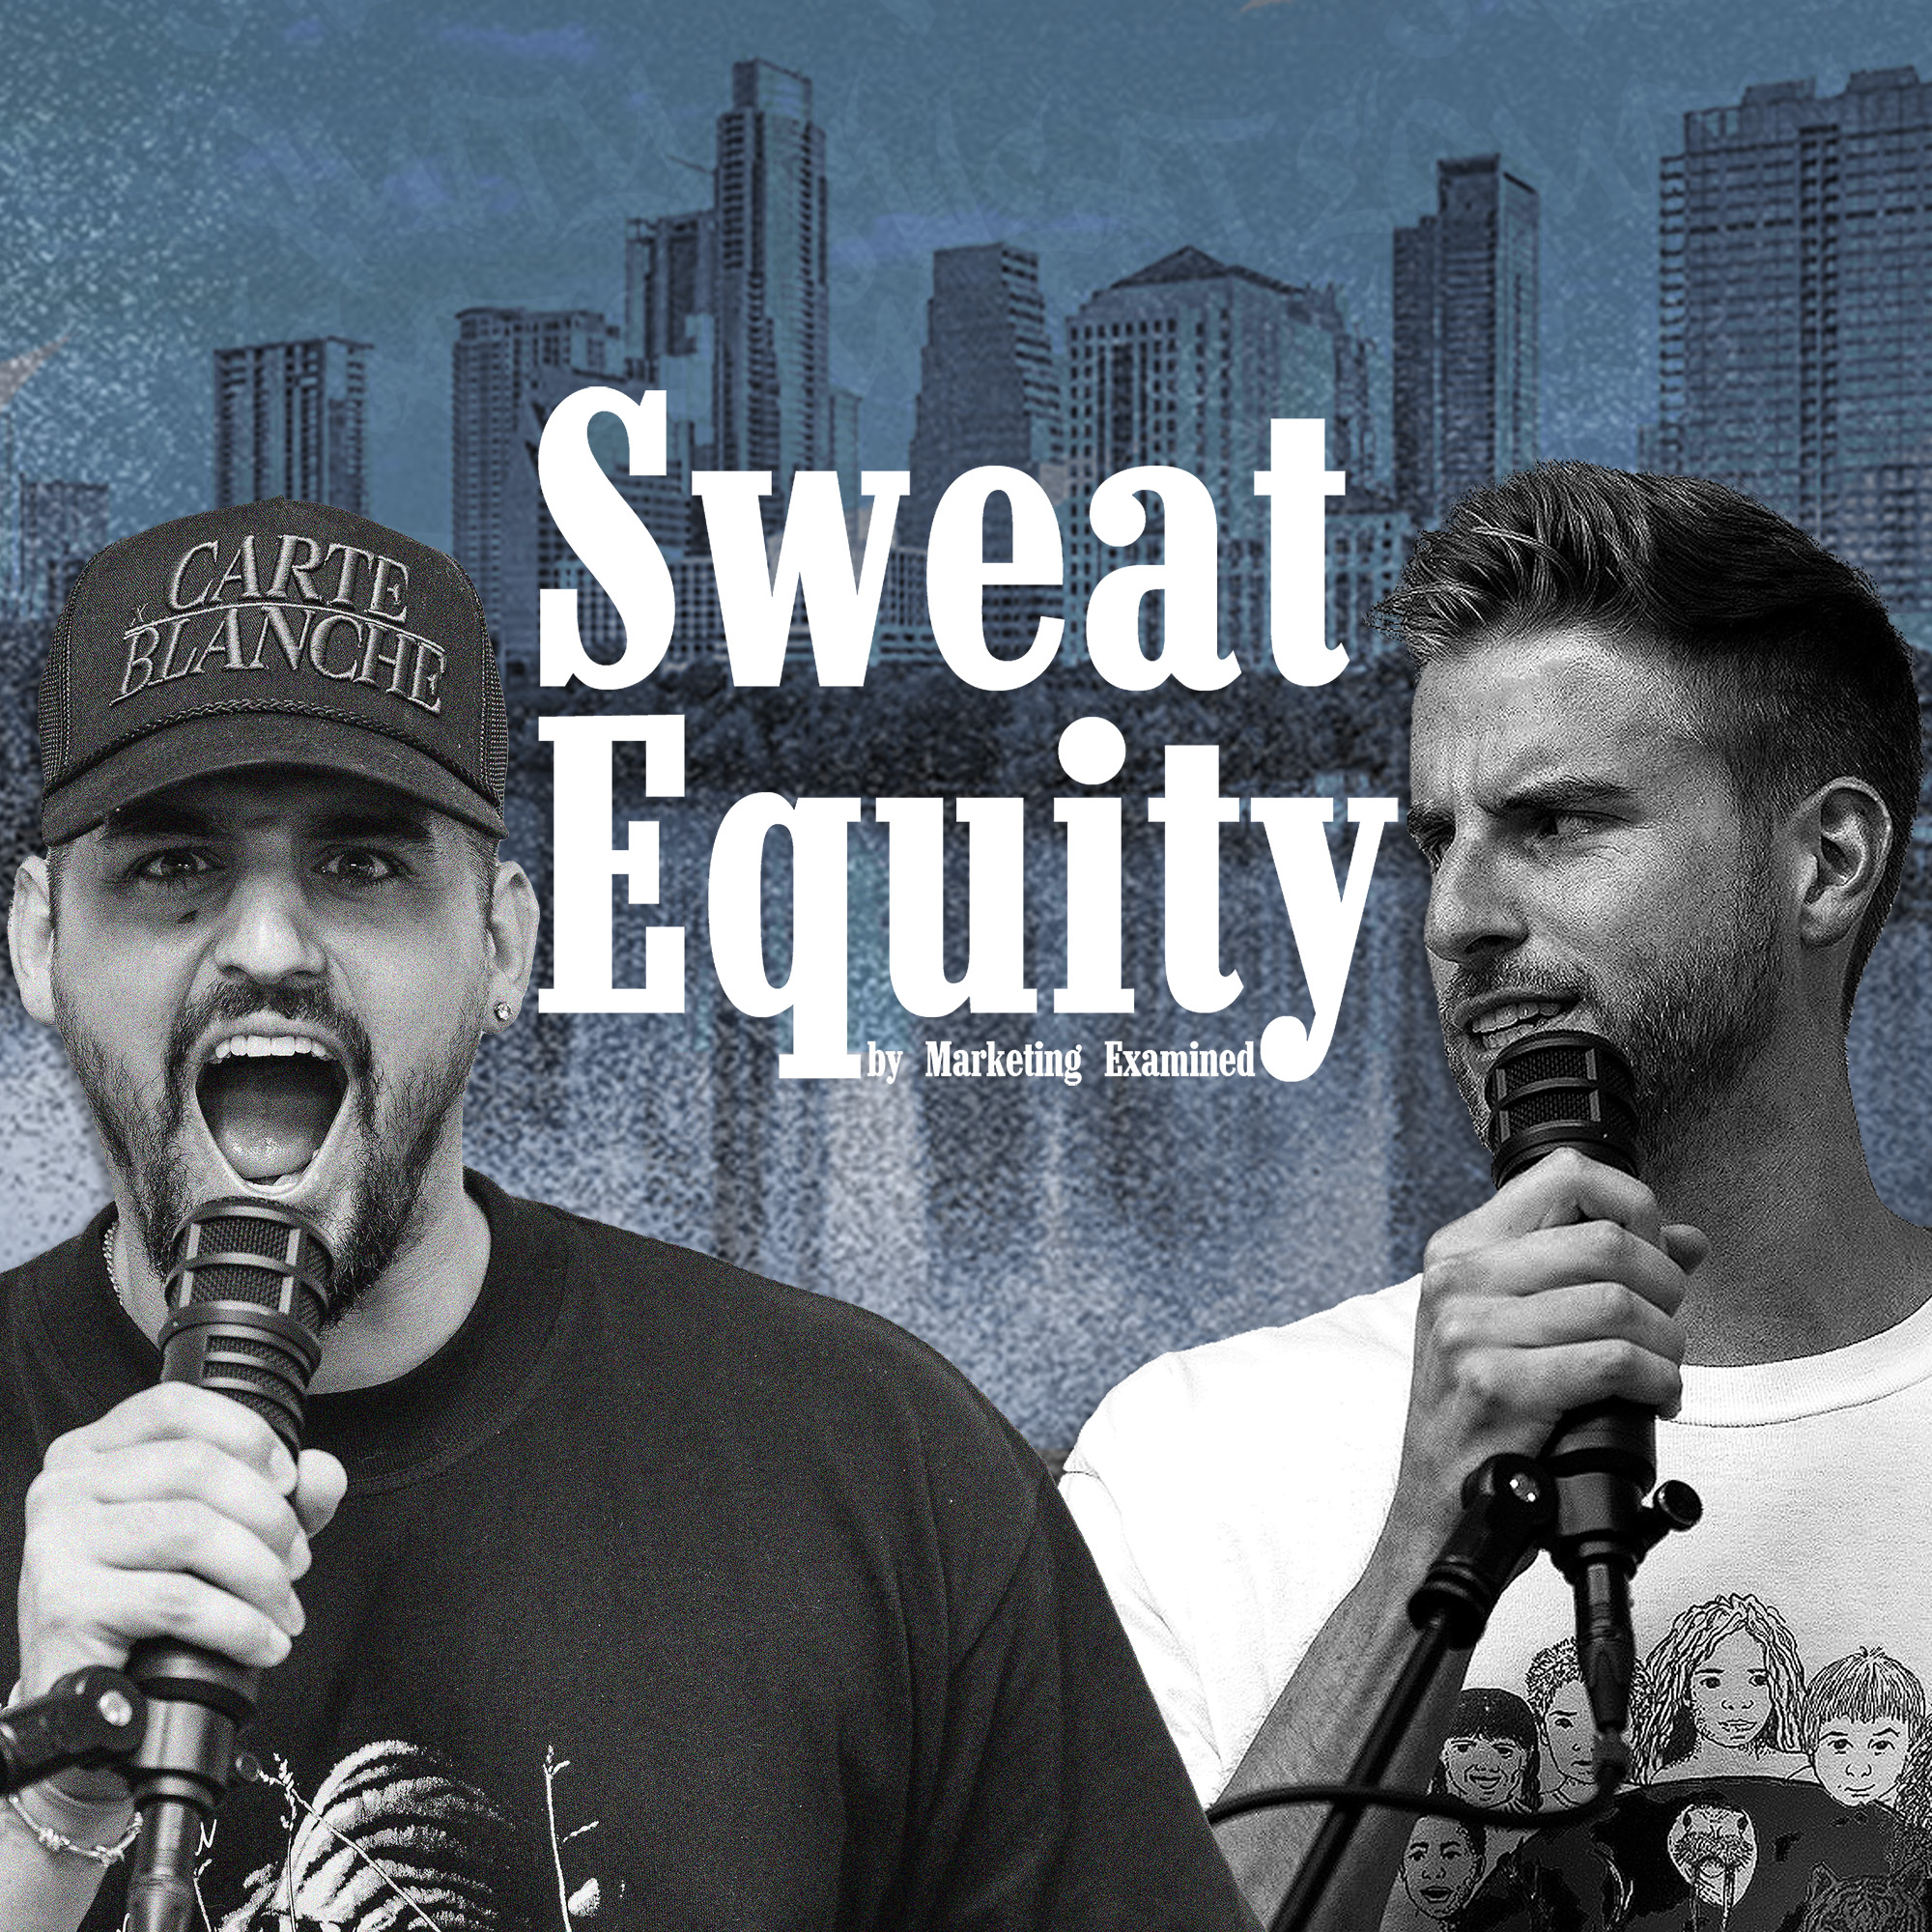 Artwork for Sweat Equity by Marketing Examined